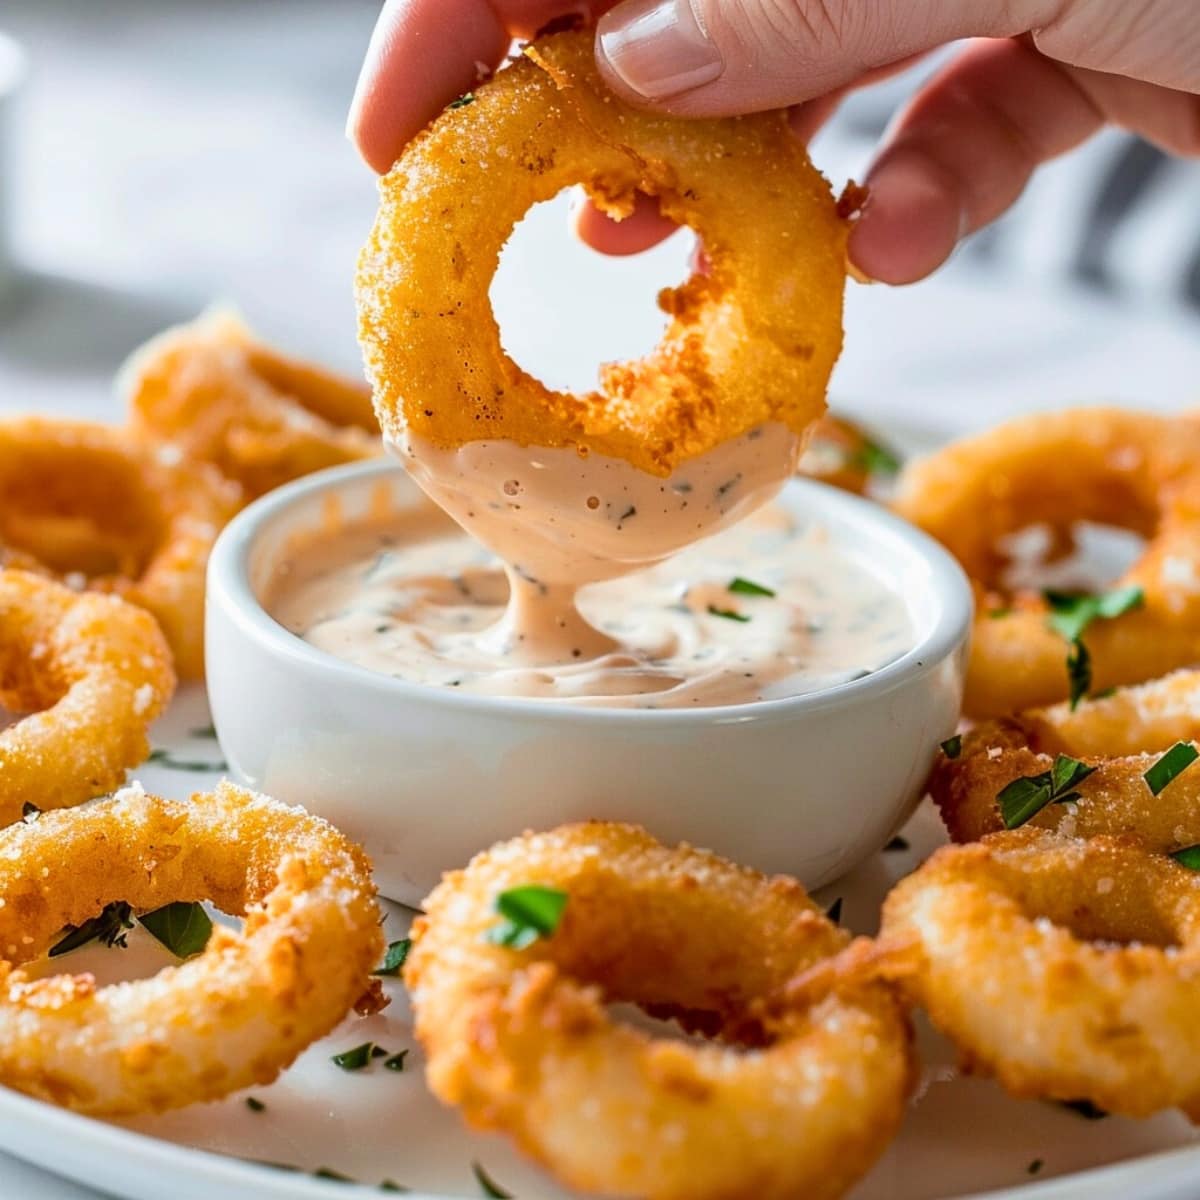 Plate of onion rings with a bowl of dipping sauce in the center.